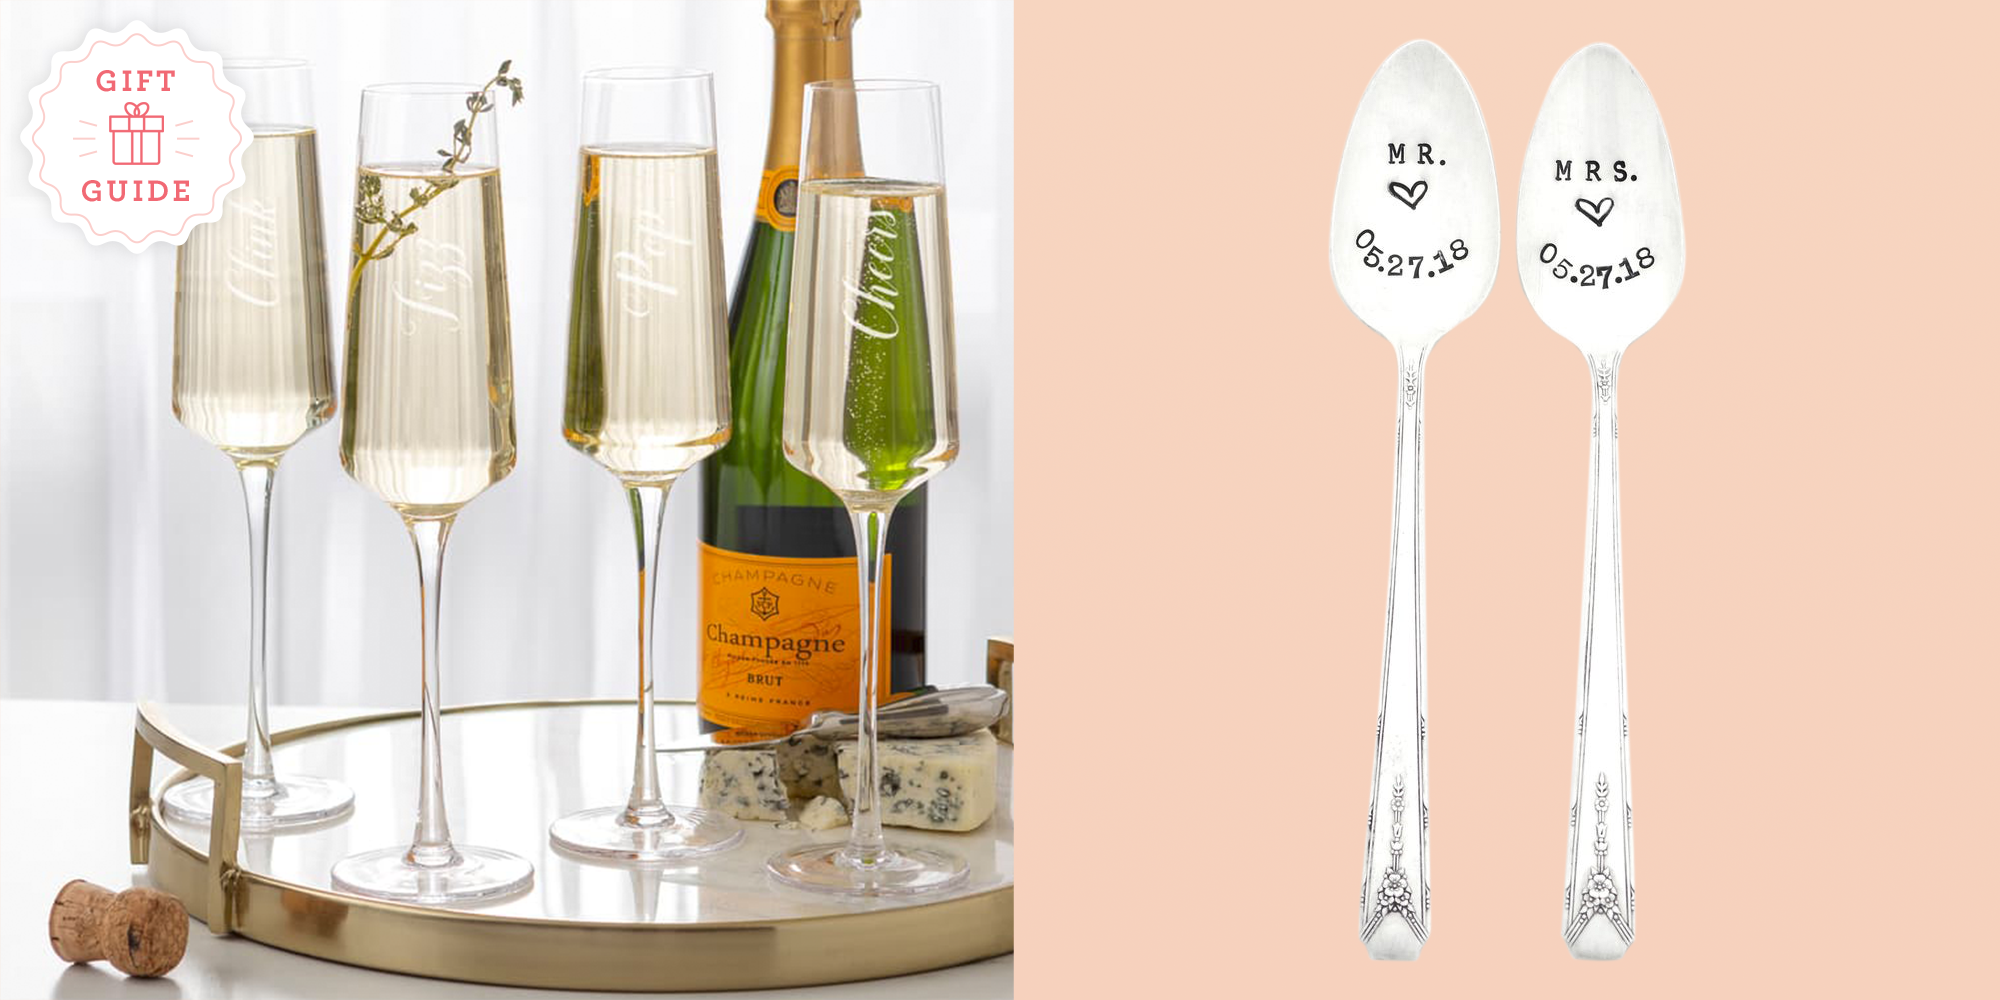 30 Bridal Shower Gift Ideas For The Bride Best Wedding Shower Gifts